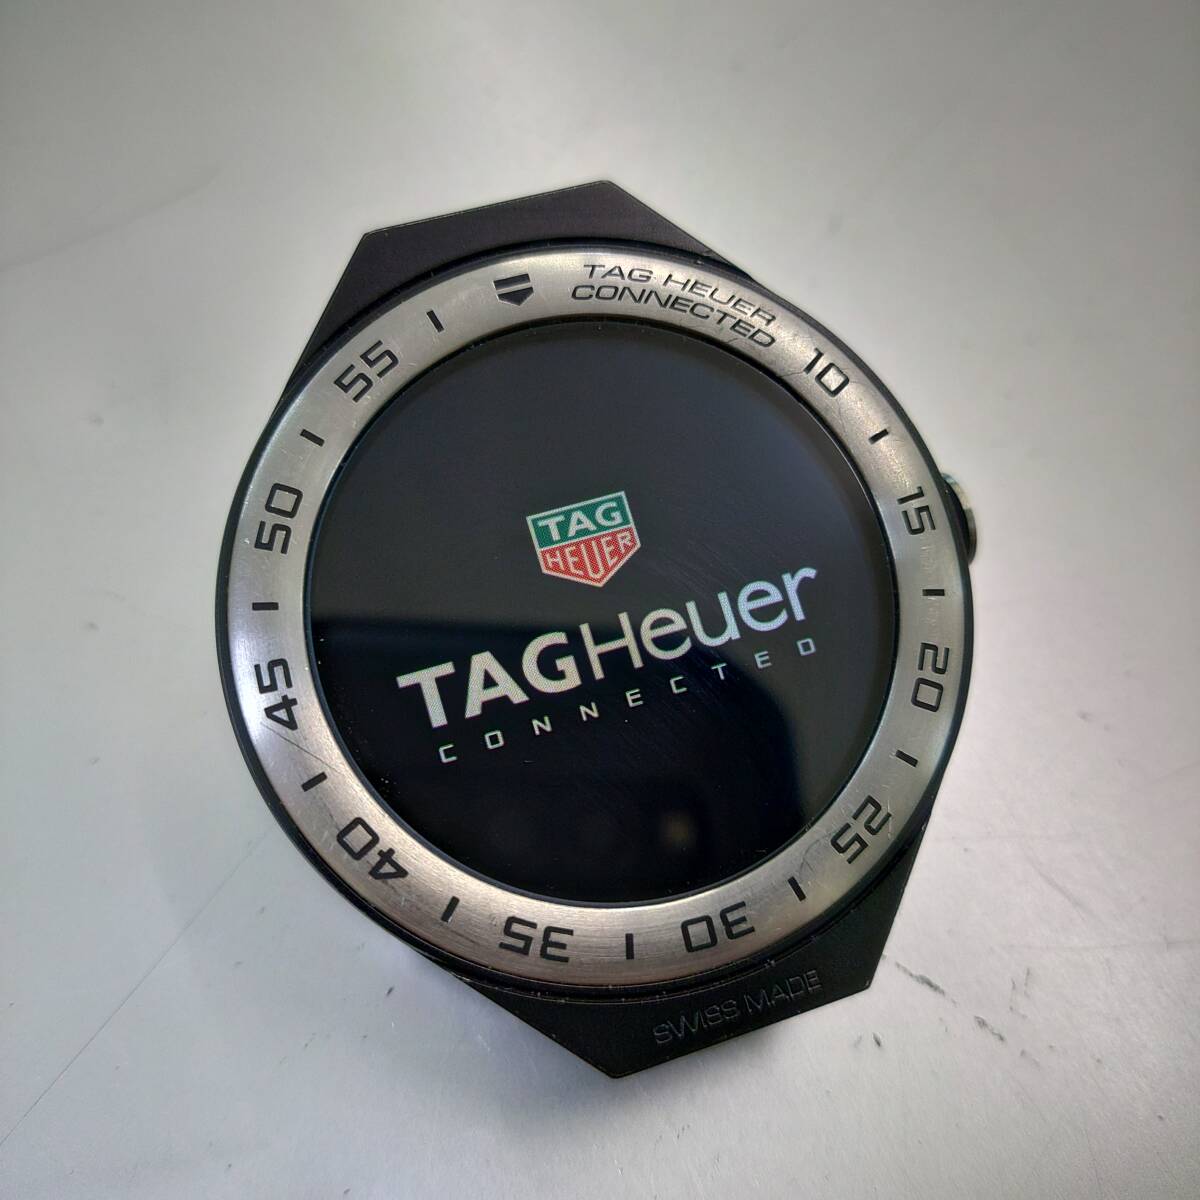  TAG Heuer connector ktedo modular 45 second generation smart watch combination body only. 